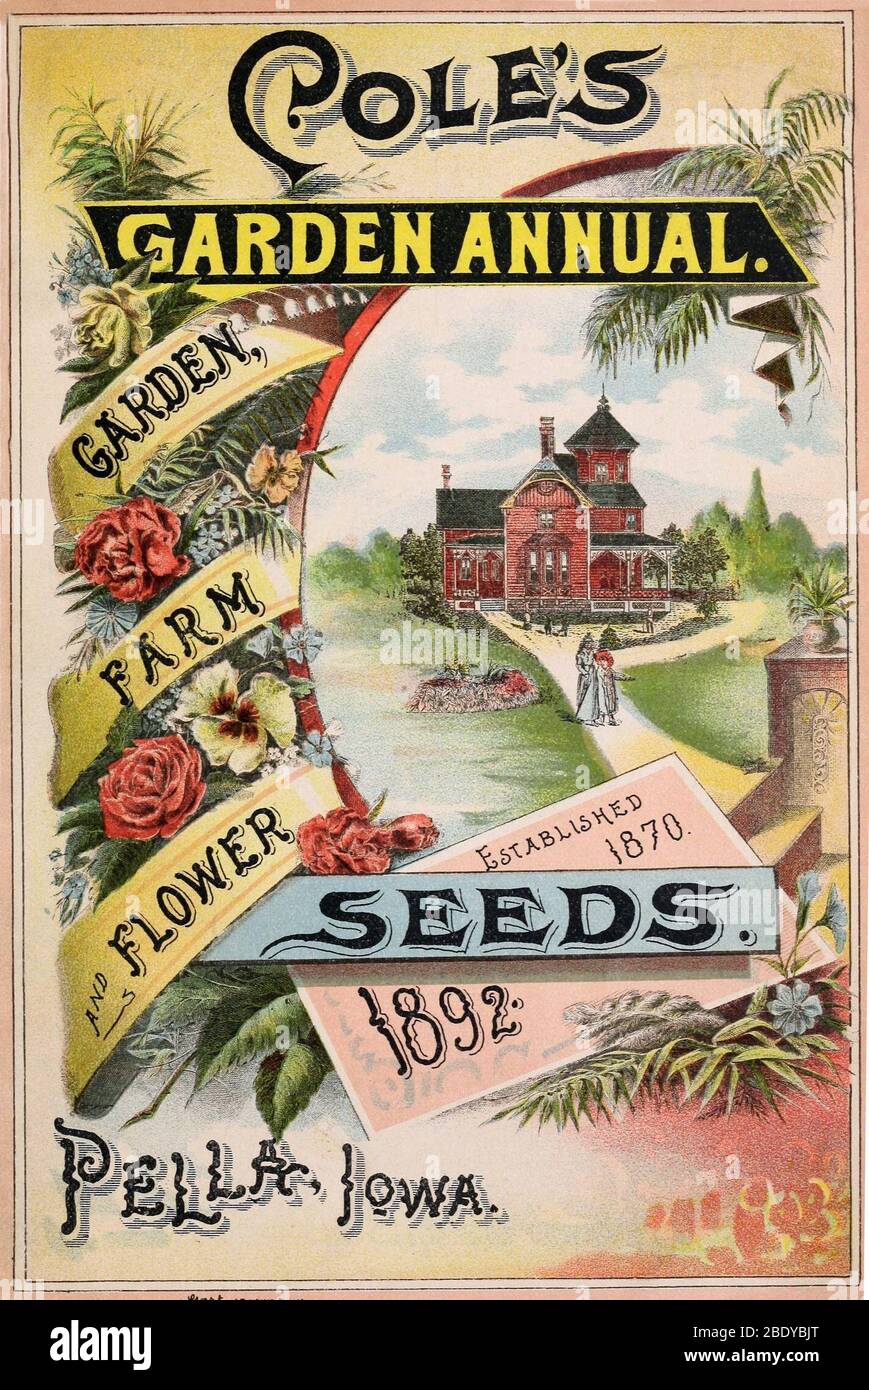 Cole's Seeds, Garden Annual, 1892 Banque D'Images